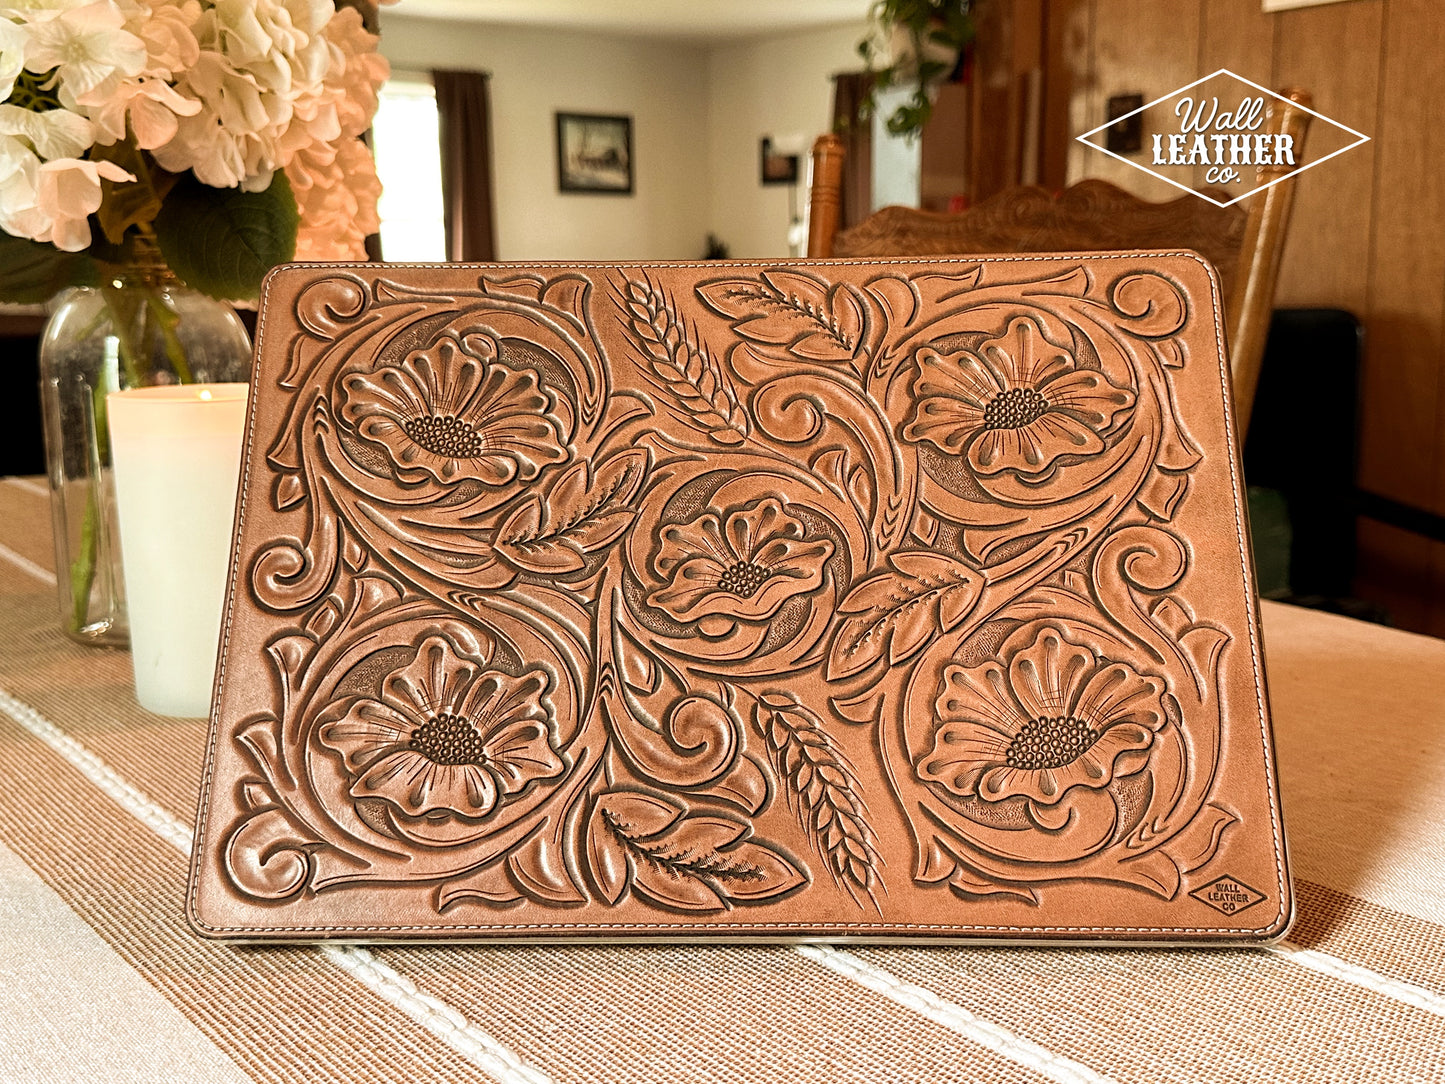 Tooled Leather MacBook Laptop Cover